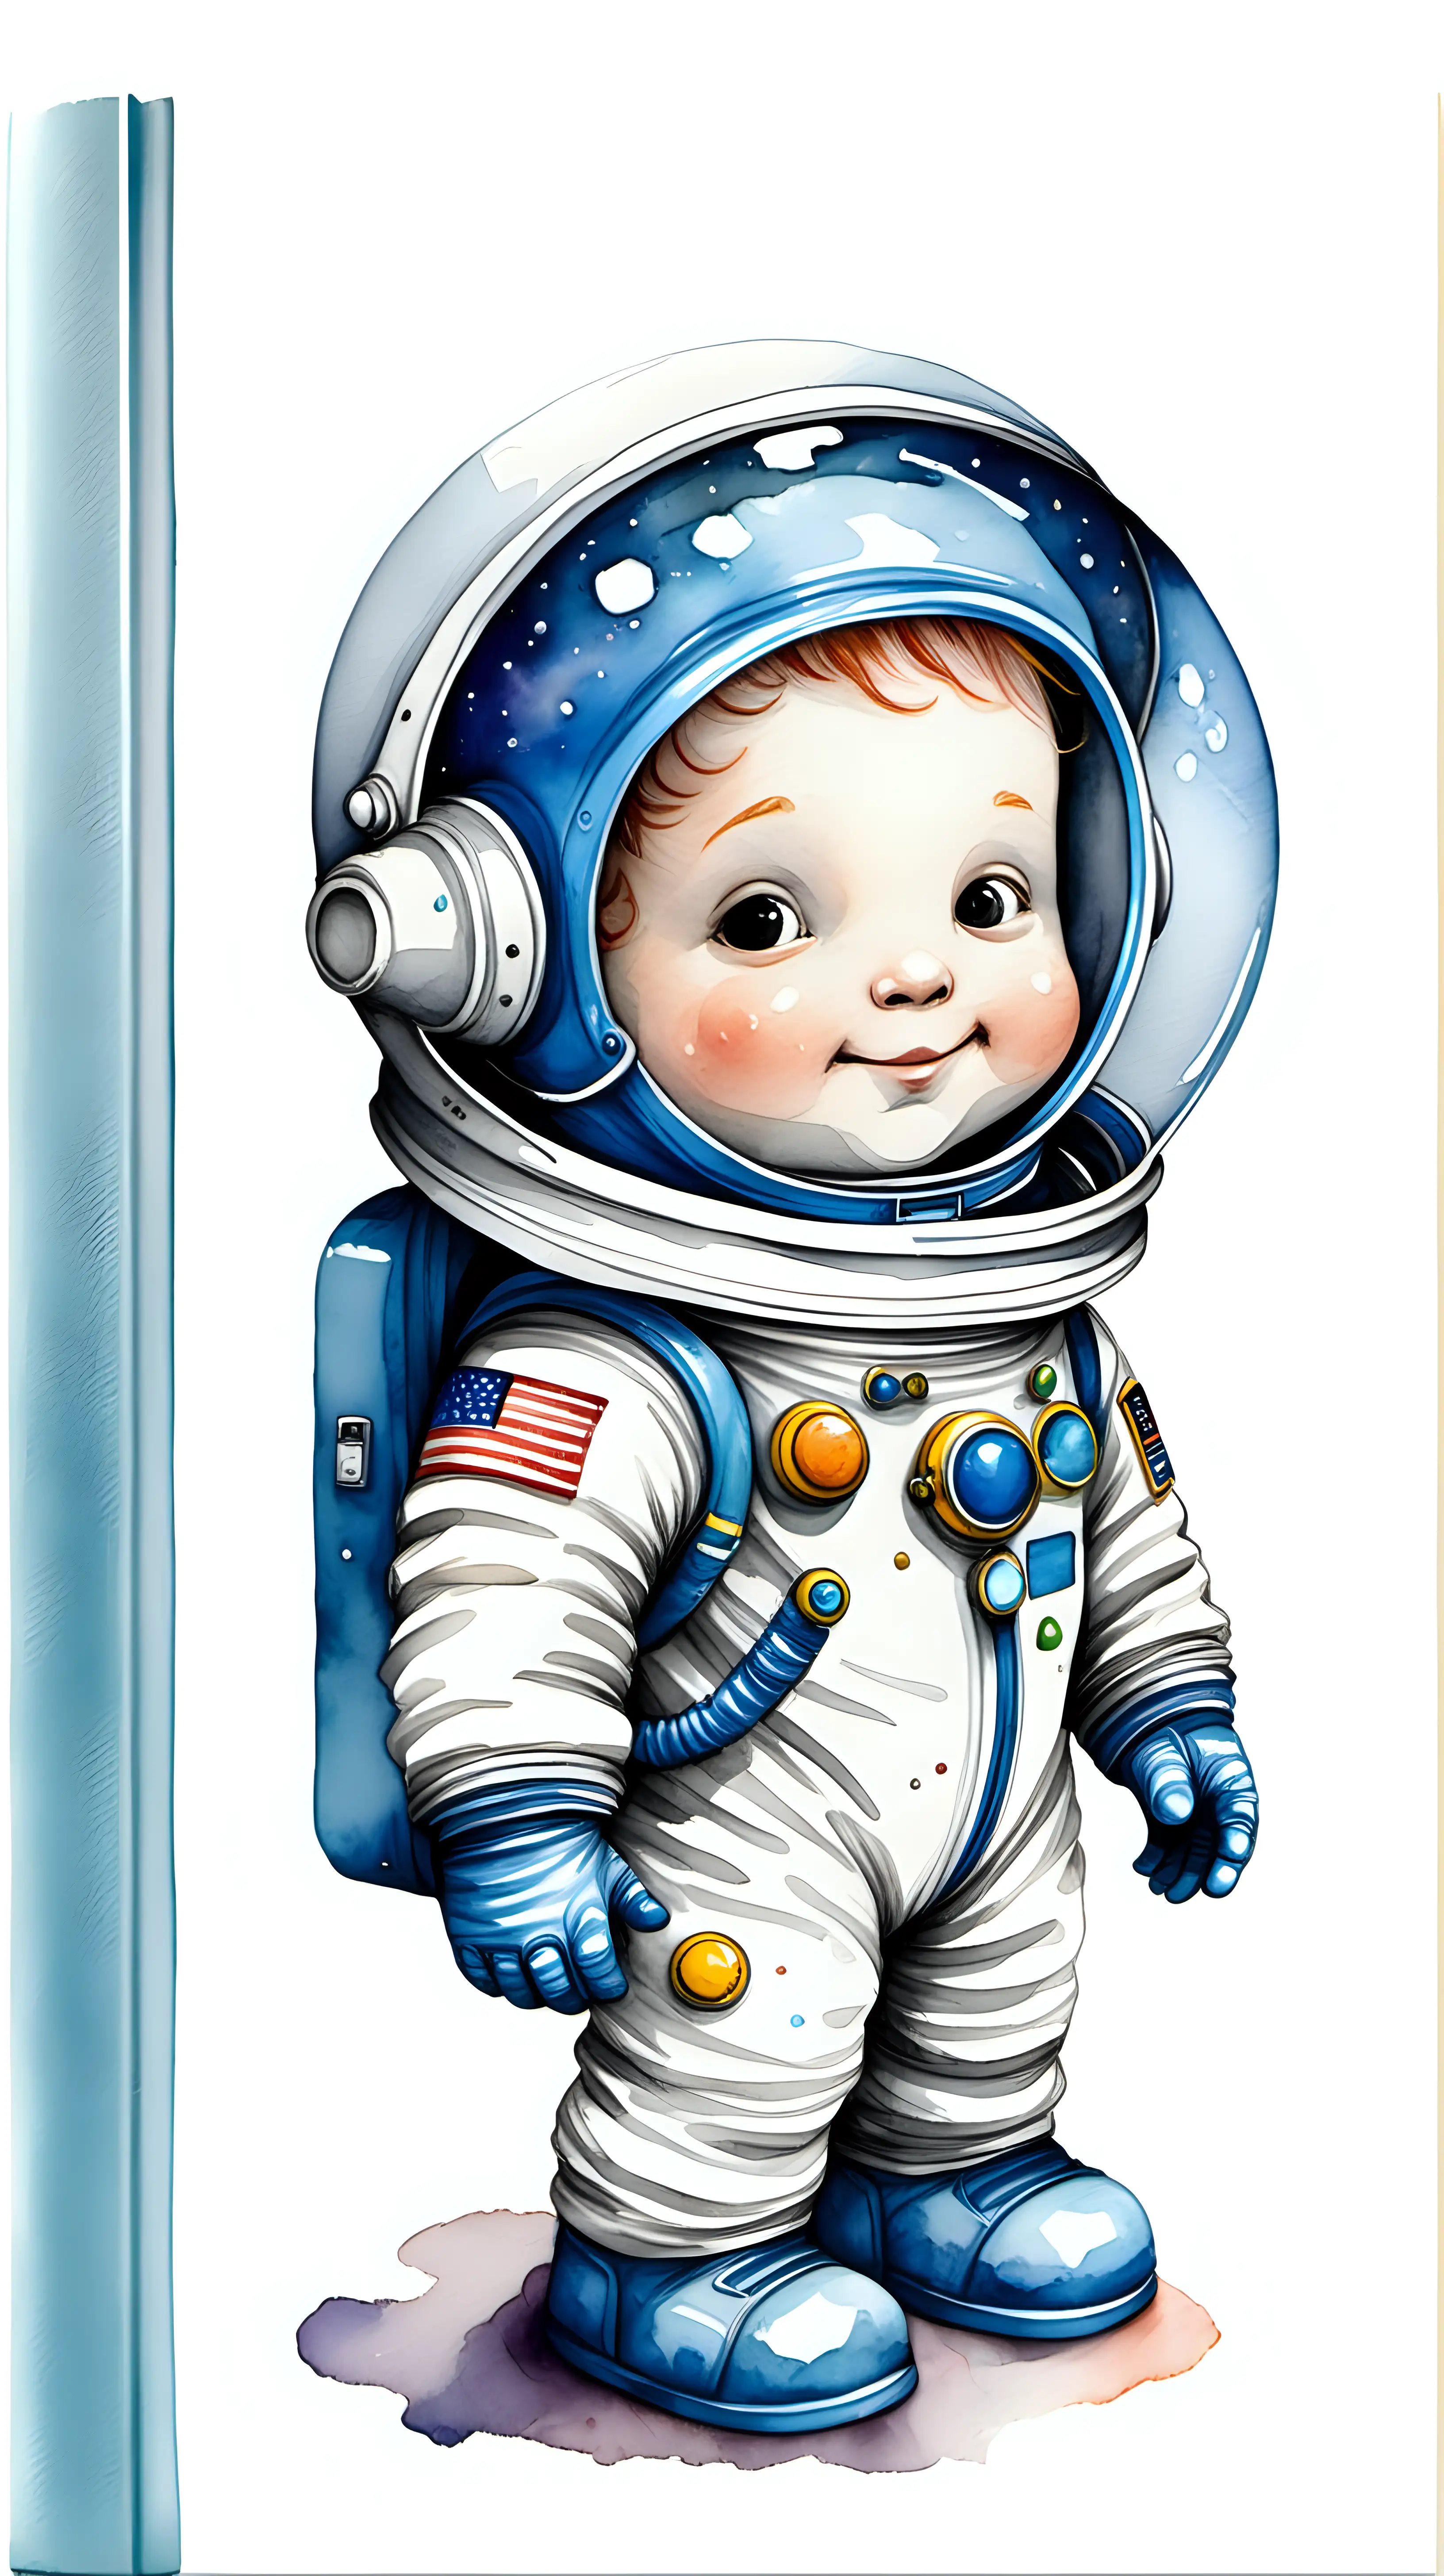 Cute Astronaut in Light Grey Space Suit with Blue Glass Helmet Watercolour Storybook Illustration